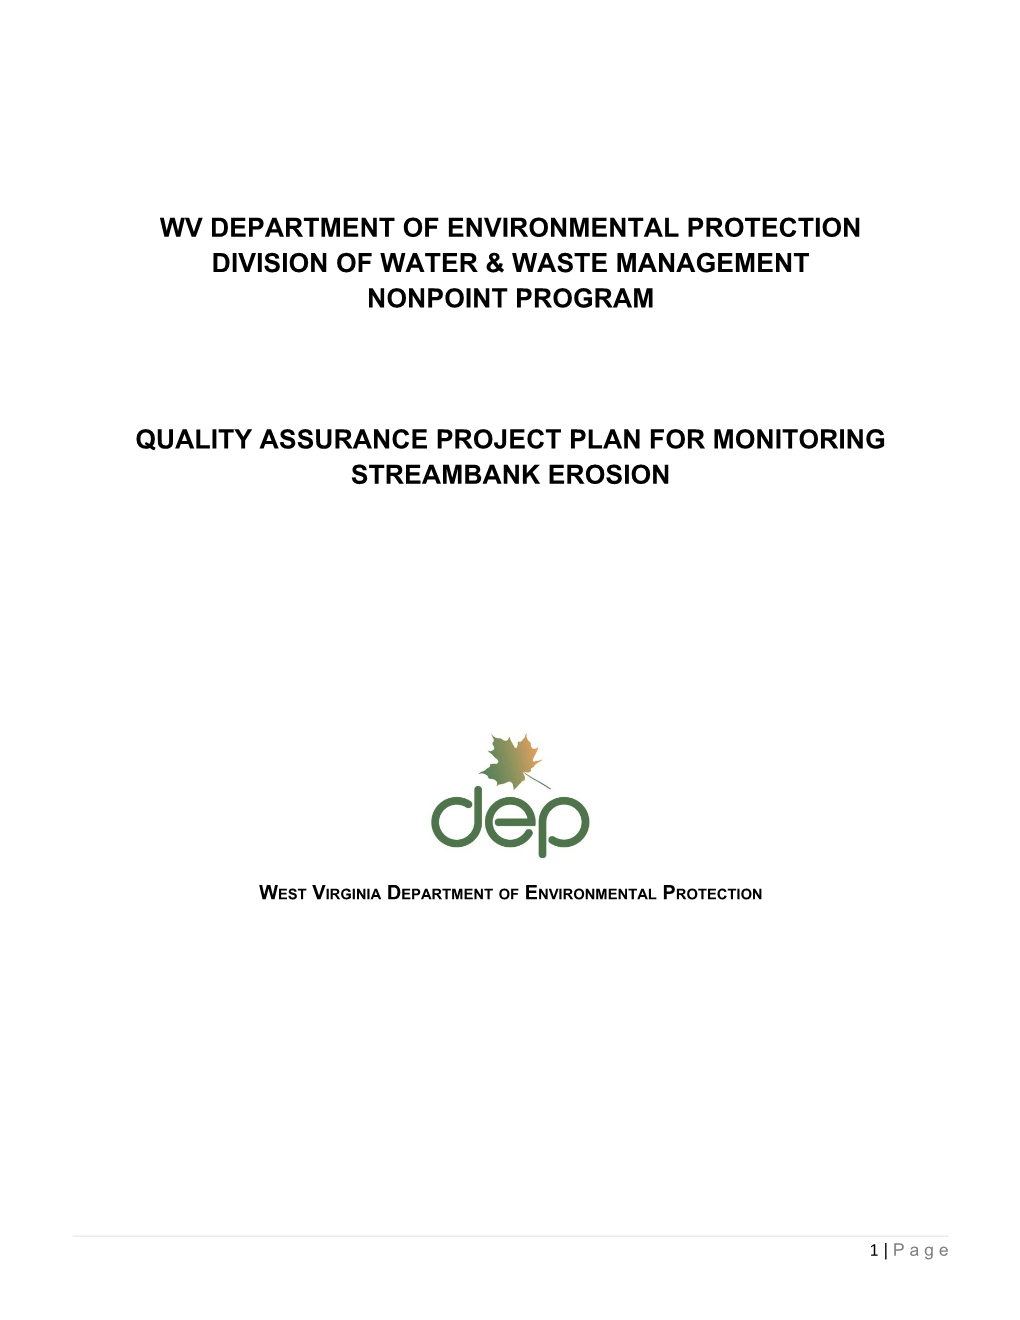 Wv Department of Environmental Protection